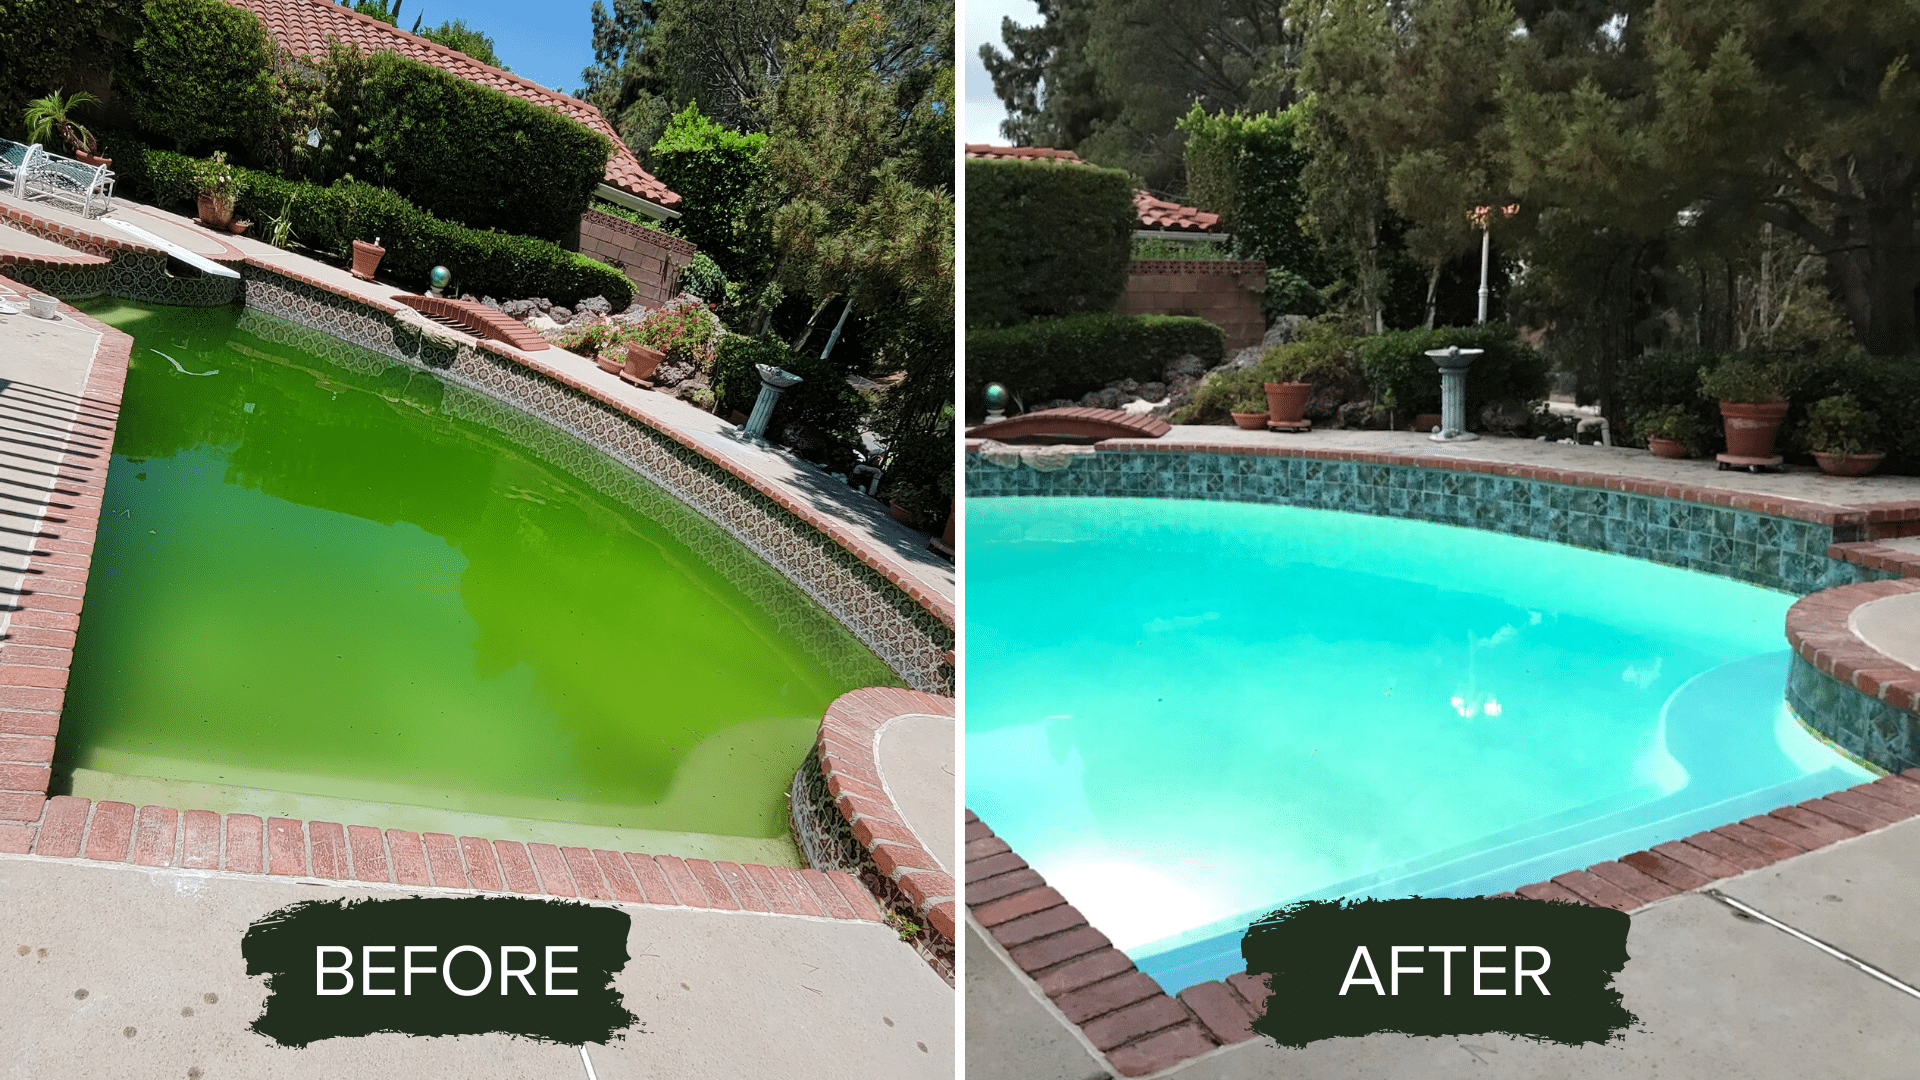 BEFORE AFTER POOL REMODEL